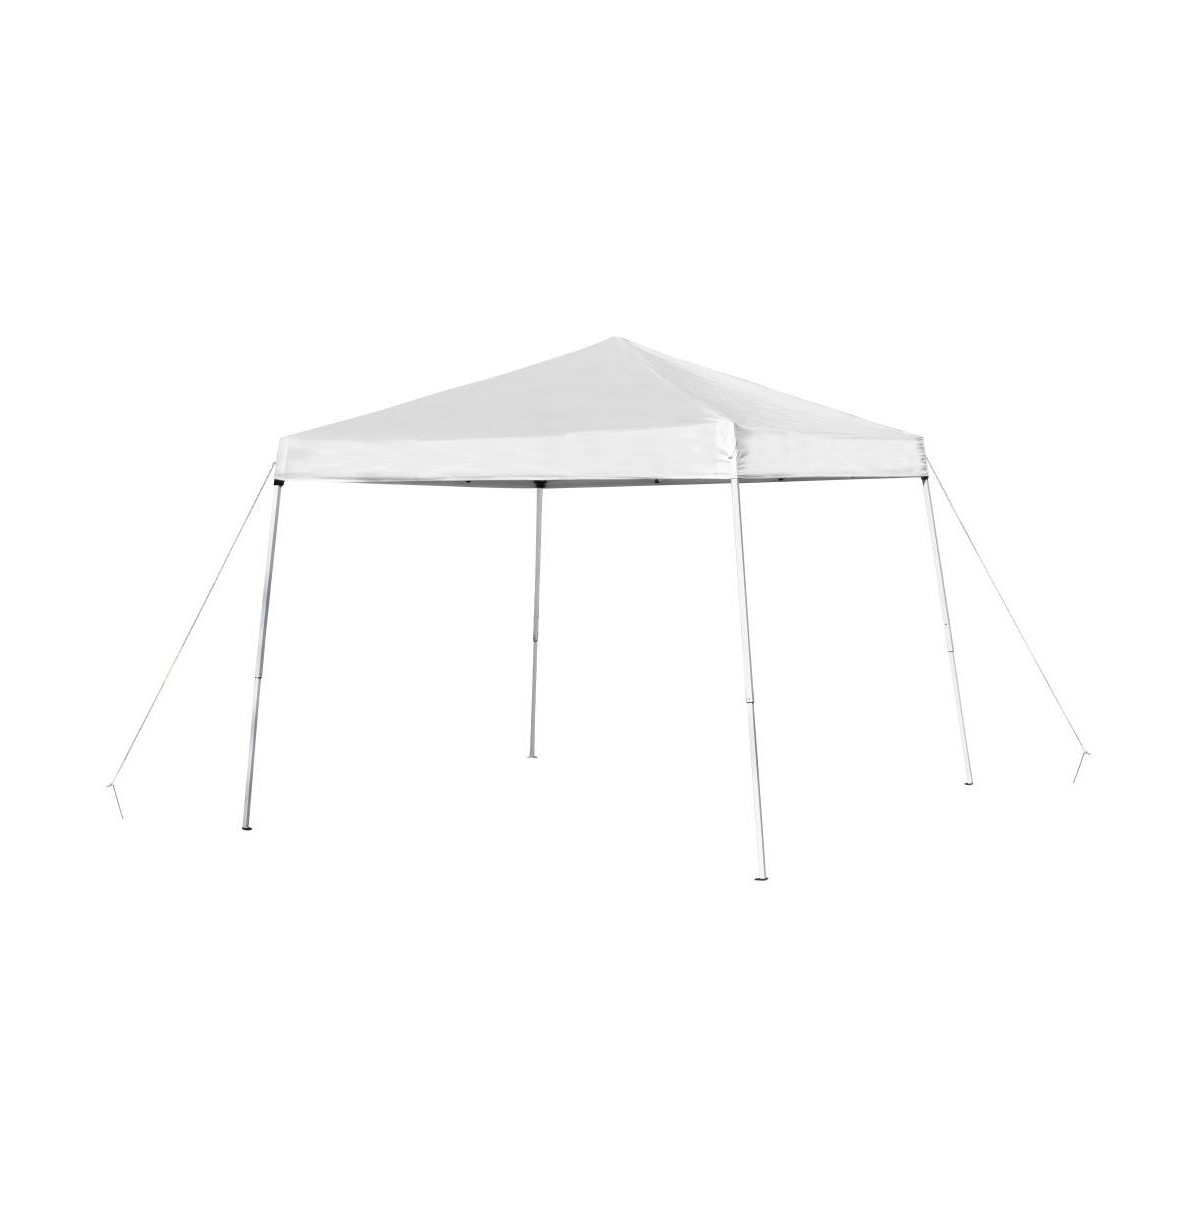 Tamar 10'X10' Weather Resistant, Uv Coated Pop Up Canopy Tent With Reinforced Corners, Height Adjustable Frame And Carry Bag - Black